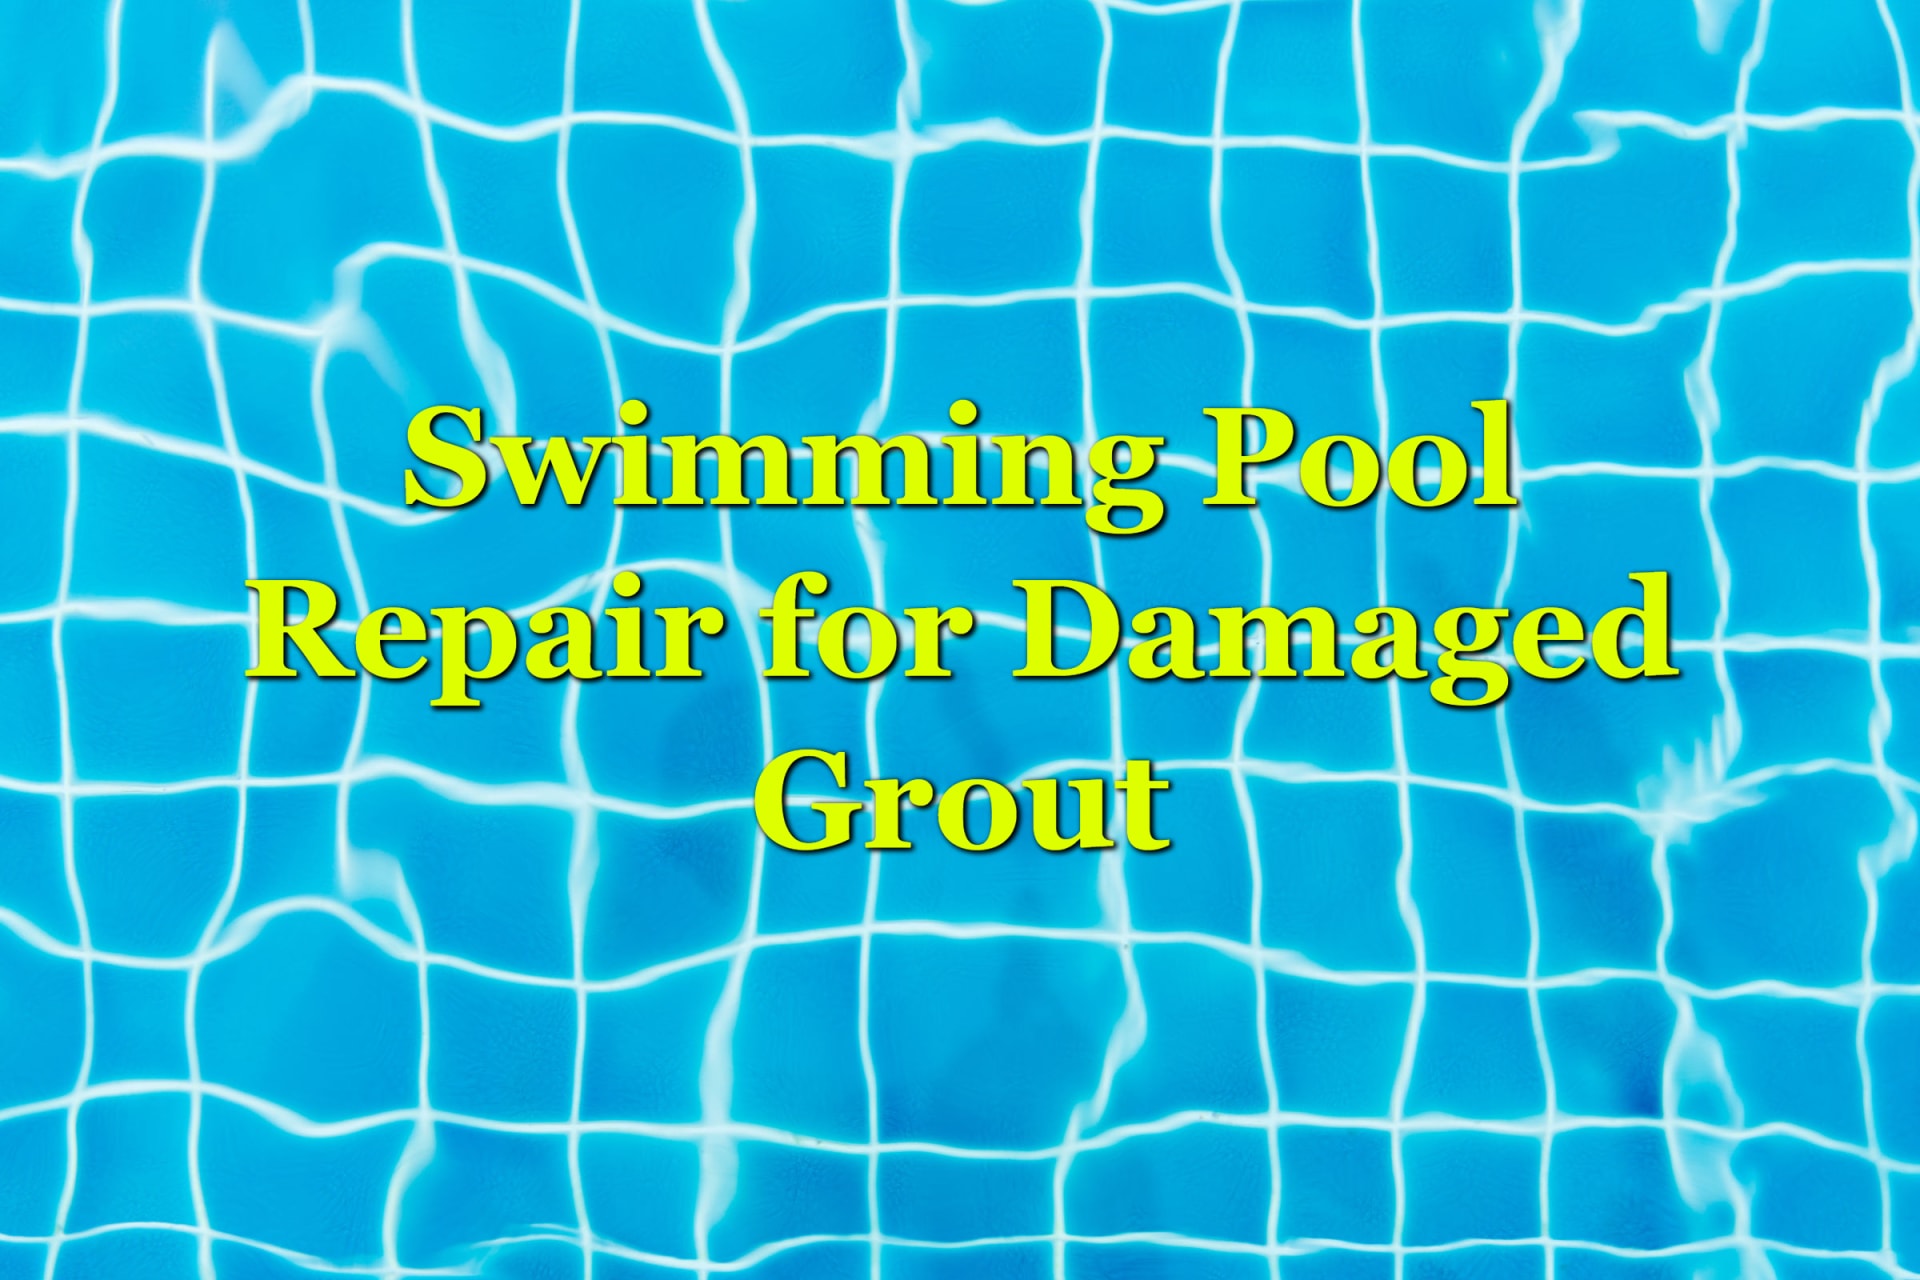 A pool that had a repair for damaged grout